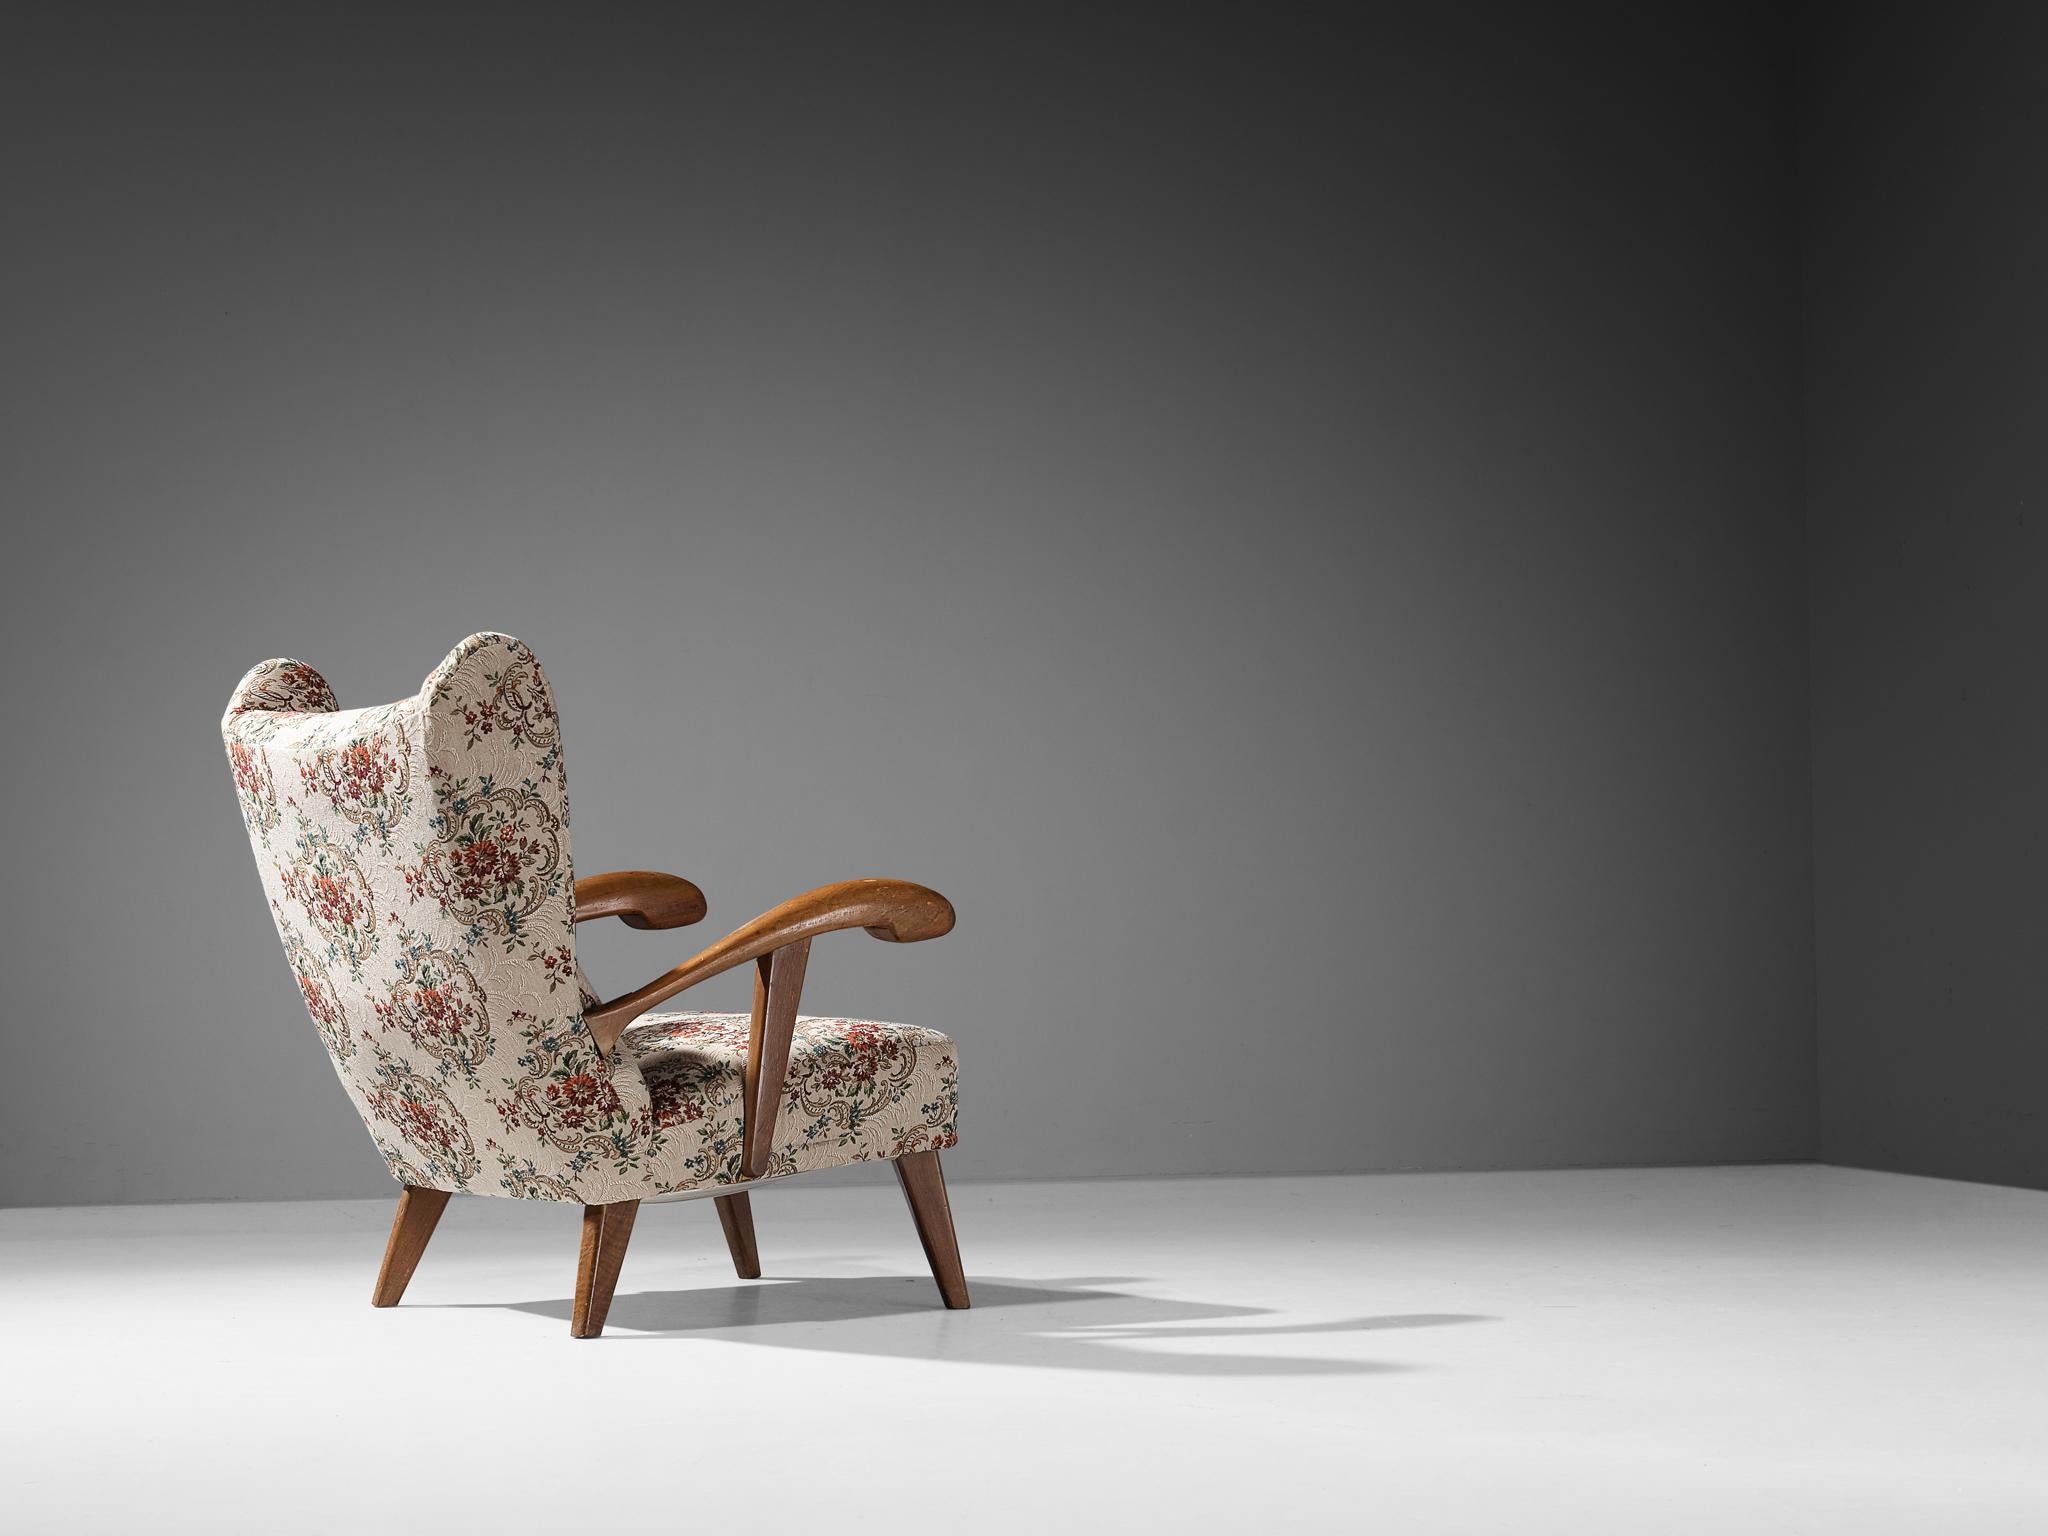 Lounge chair, stained beech, fabric, Czech Republic, 1950s. 

This beautifully designed lounge chair holds a striking construction by means of the sculpted elements discernible in the wooden frame and back. The armrests are characterized by